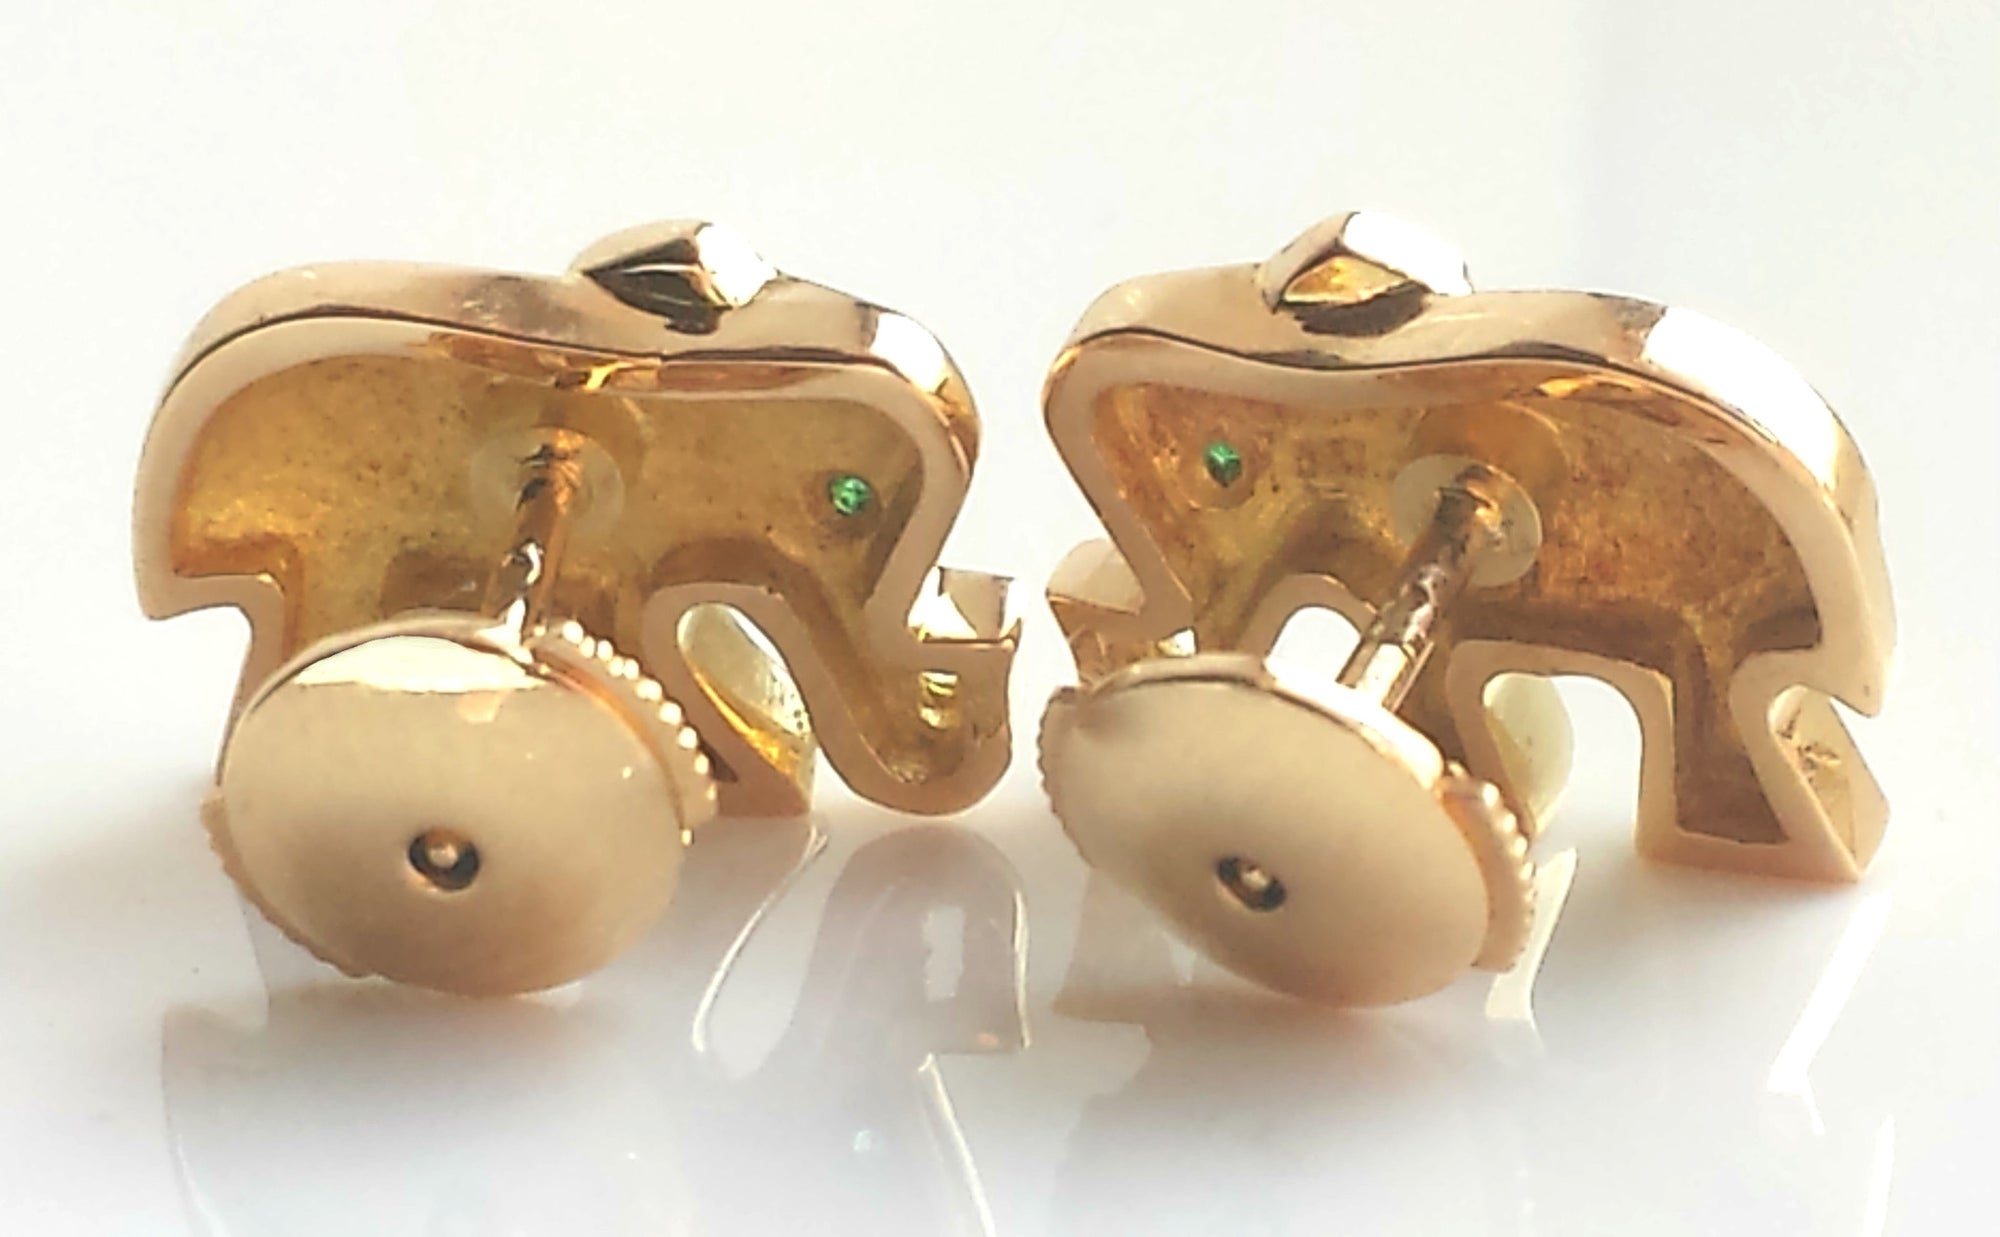 Cartier Elephant Stud Earrings in 18k Yellow Gold with Emeralds – Khandy Collection